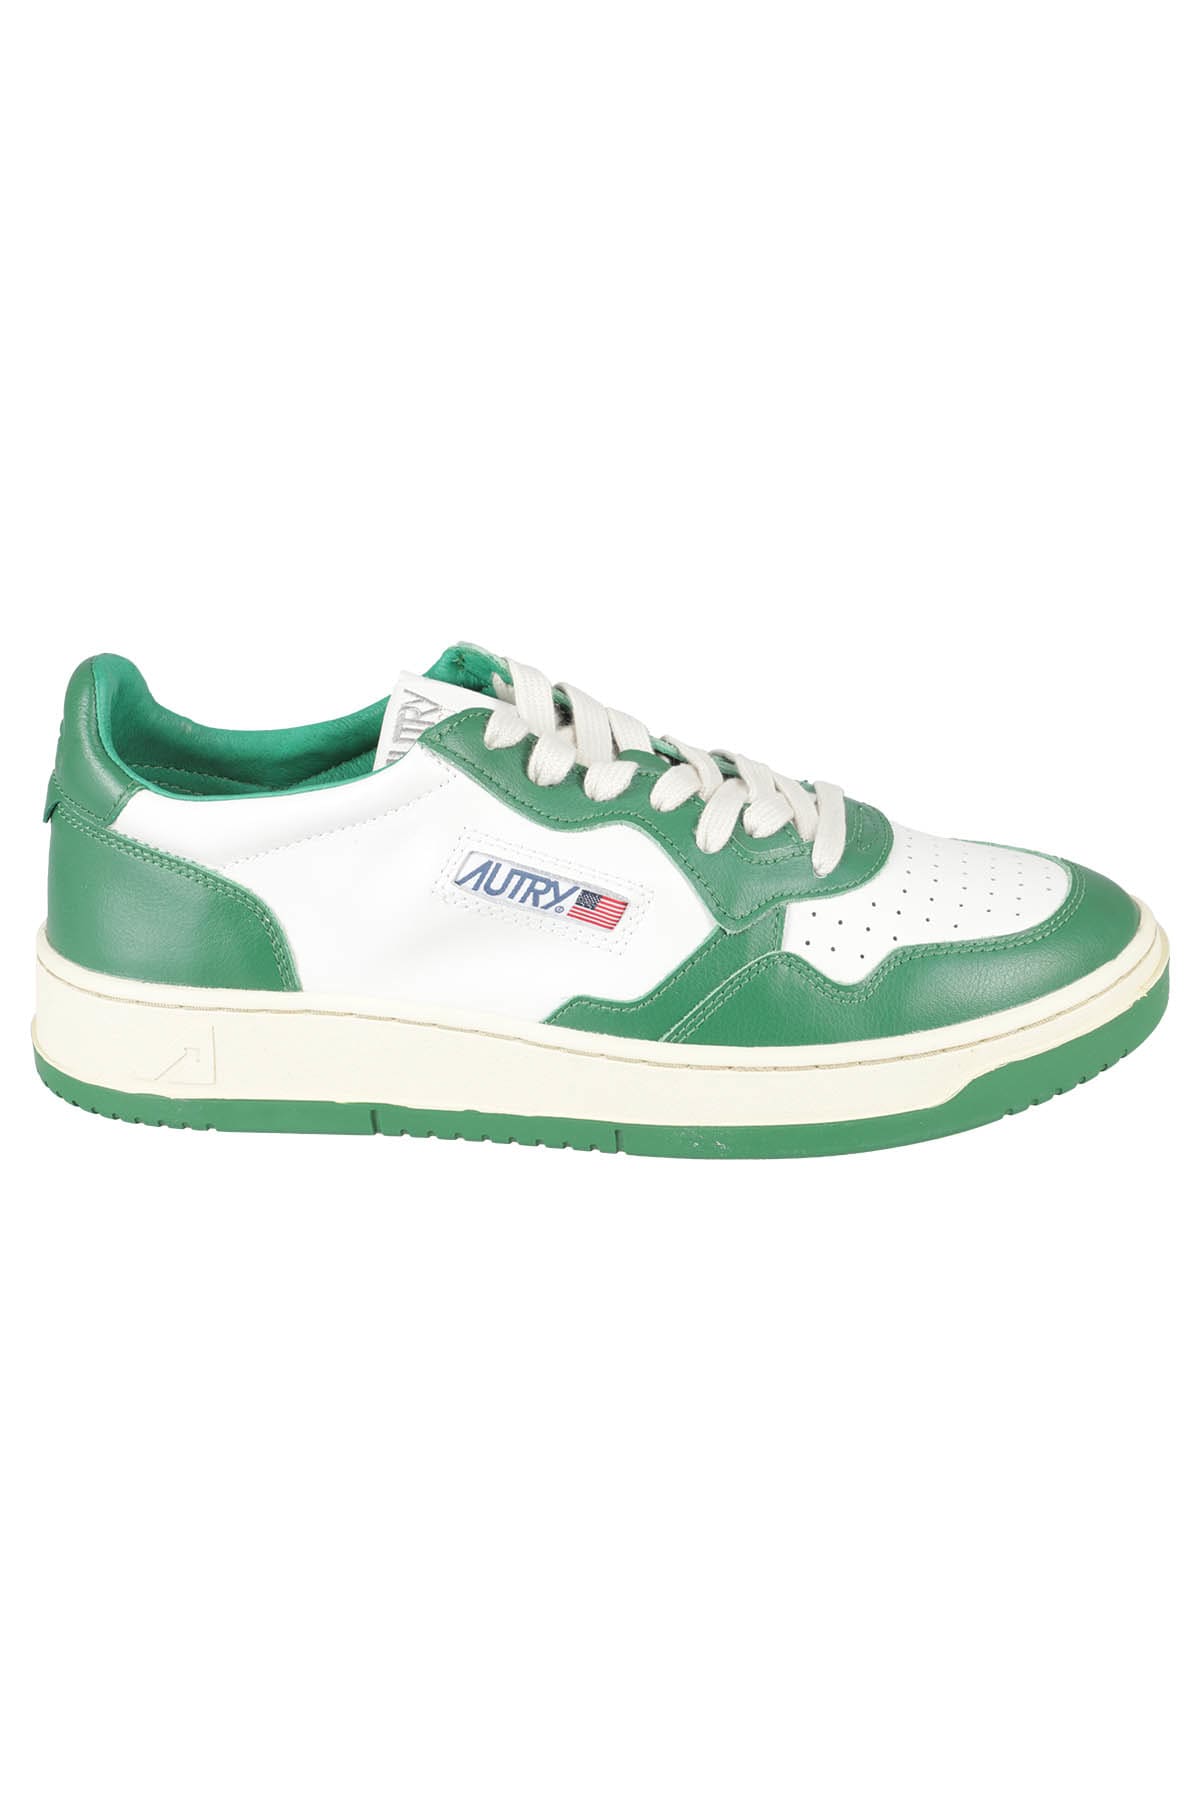 Autry 01 Low Man Goat In White Green